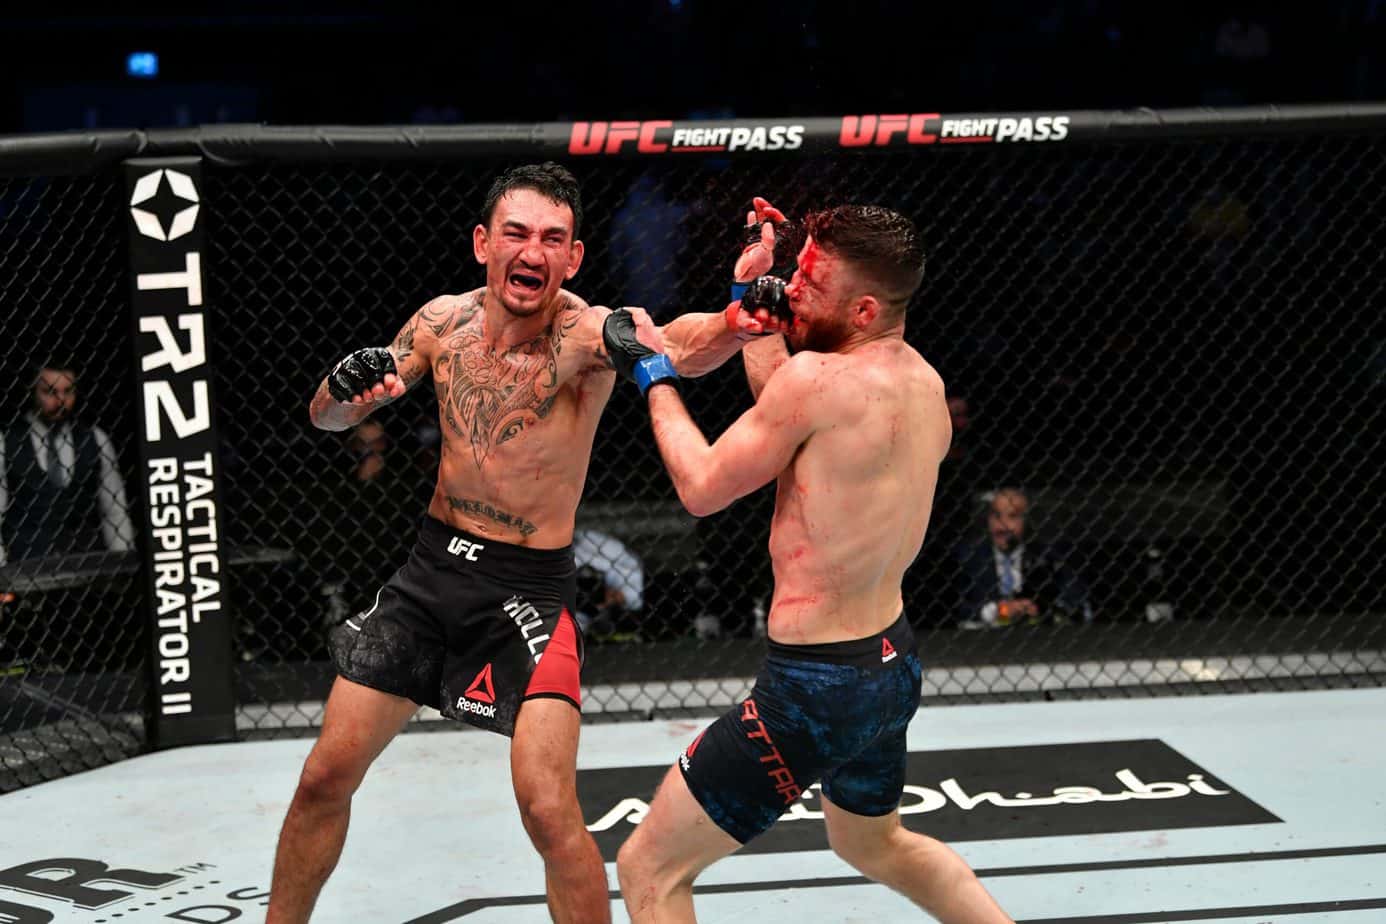 Max Holloway “Blessed”